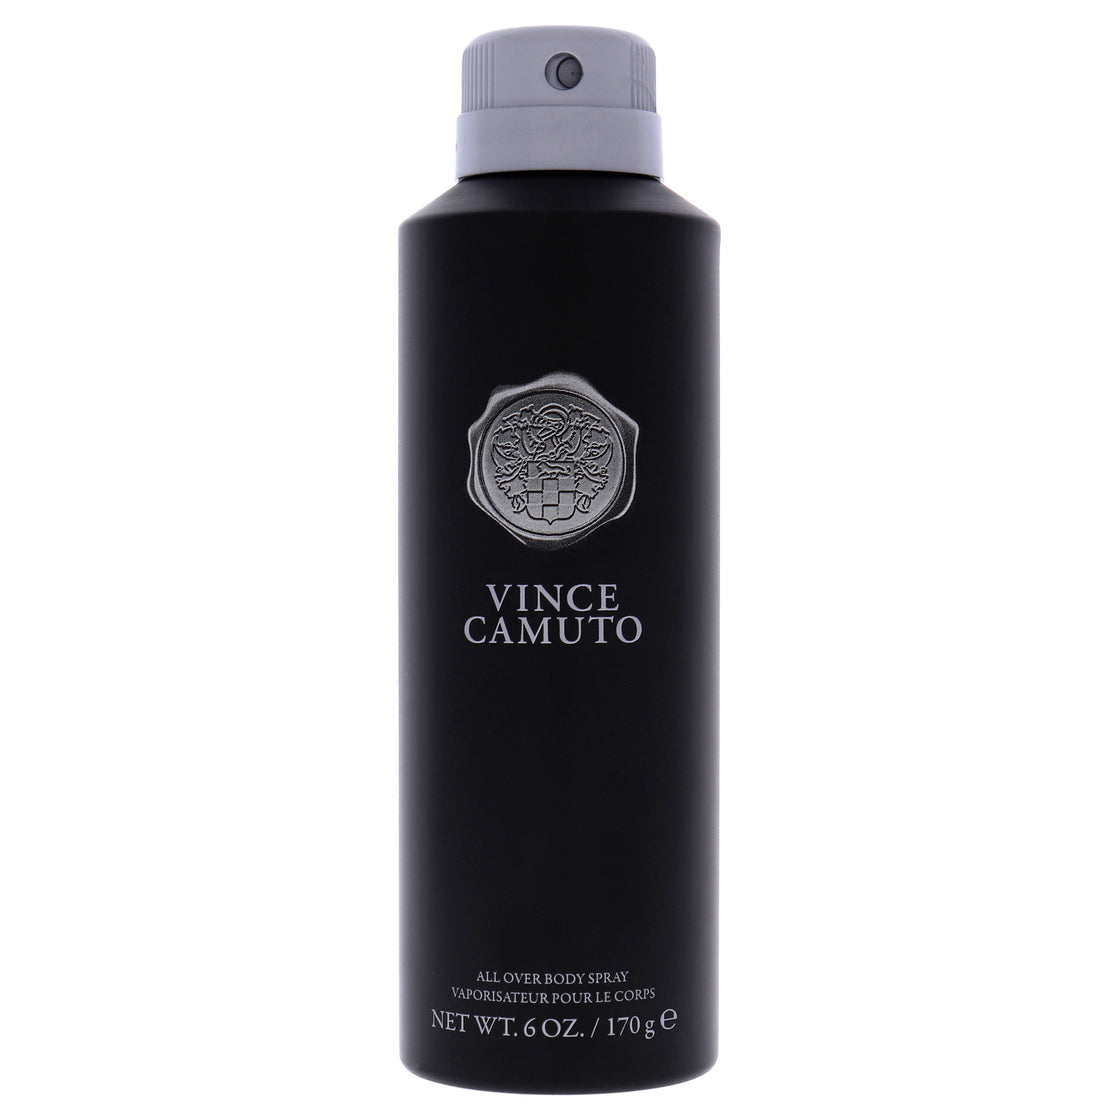 Vince Camuto Homme by Vince Camuto for Men - 6 oz Body Spray